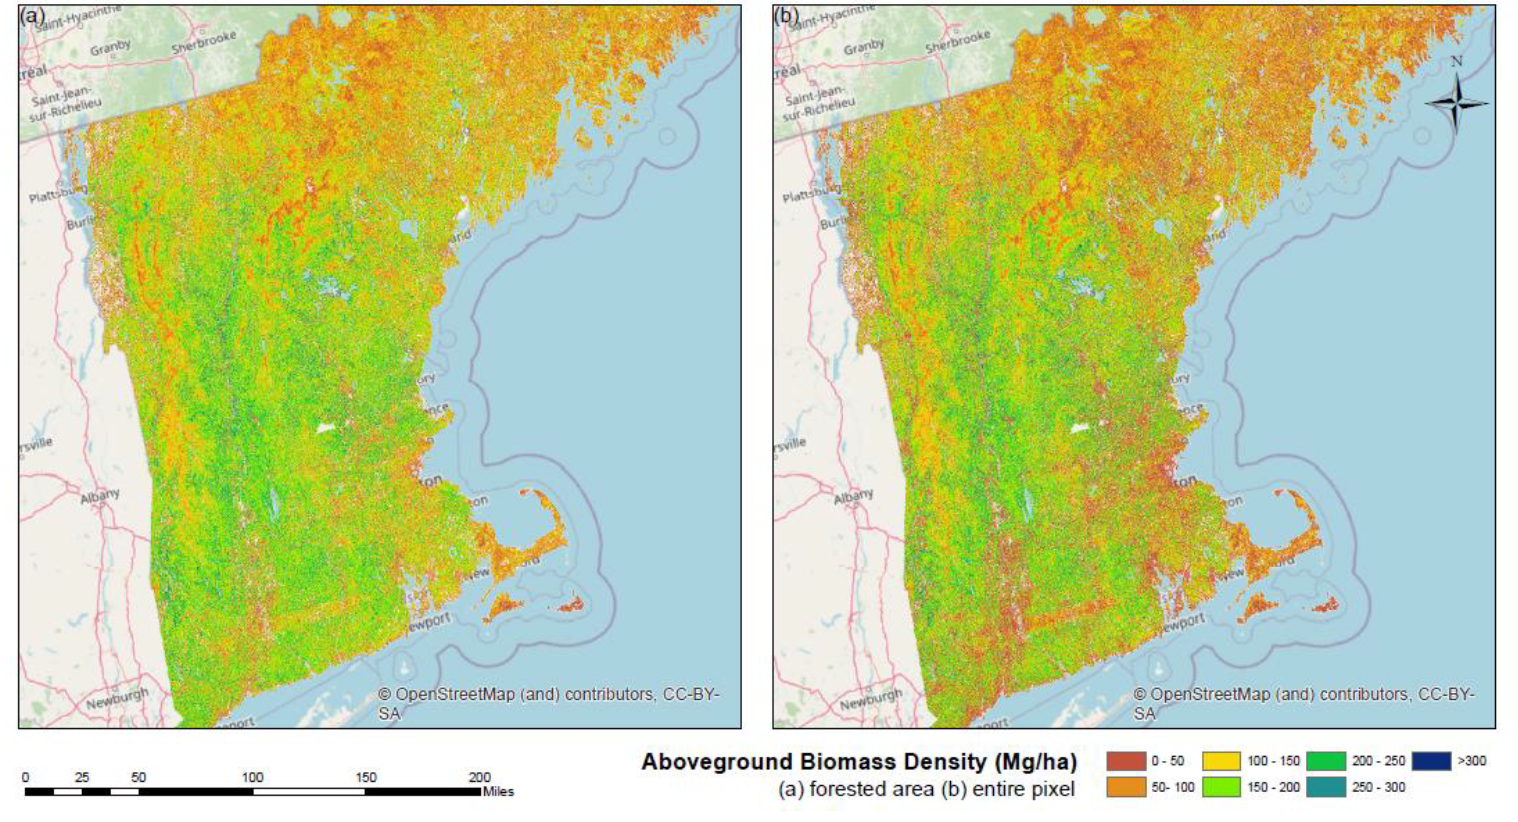 30 m resolution maps of aboveground biomass density (AGBD) over the New England region in 2015